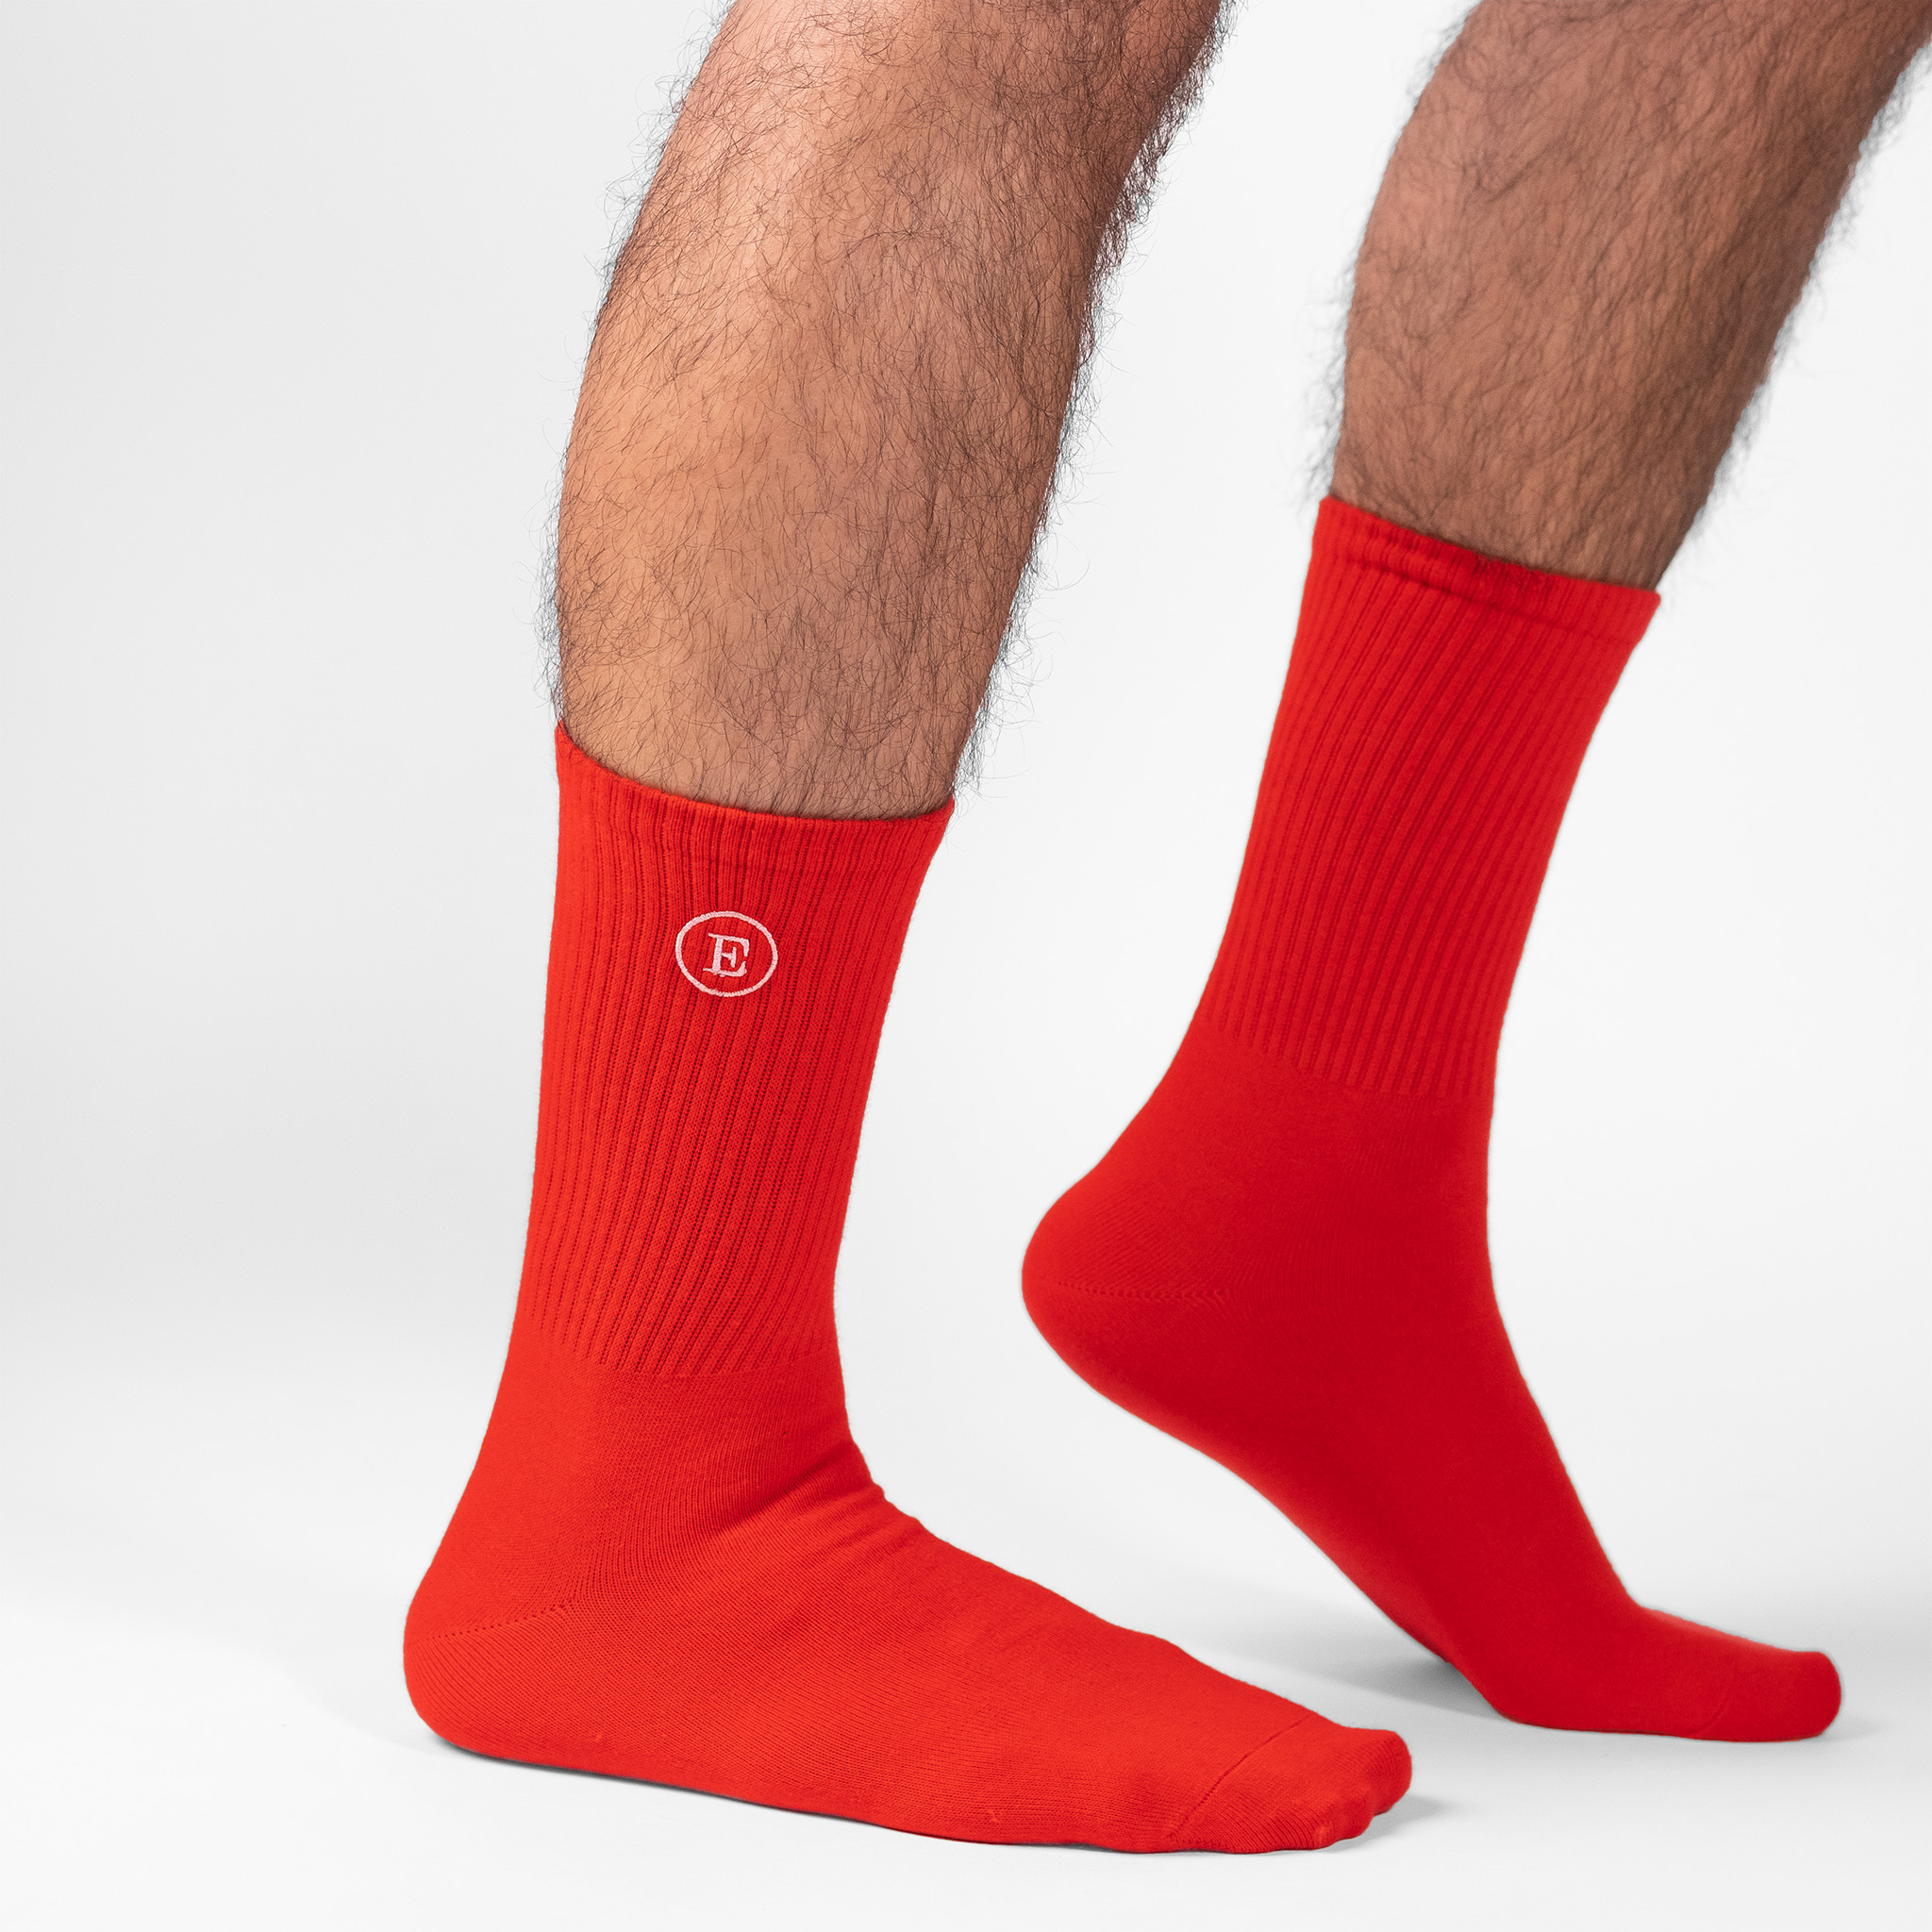 A male model wearing a pair of personalised red crew socks with the initial 'E'embroidered in white thread on the outside leg of the sock.